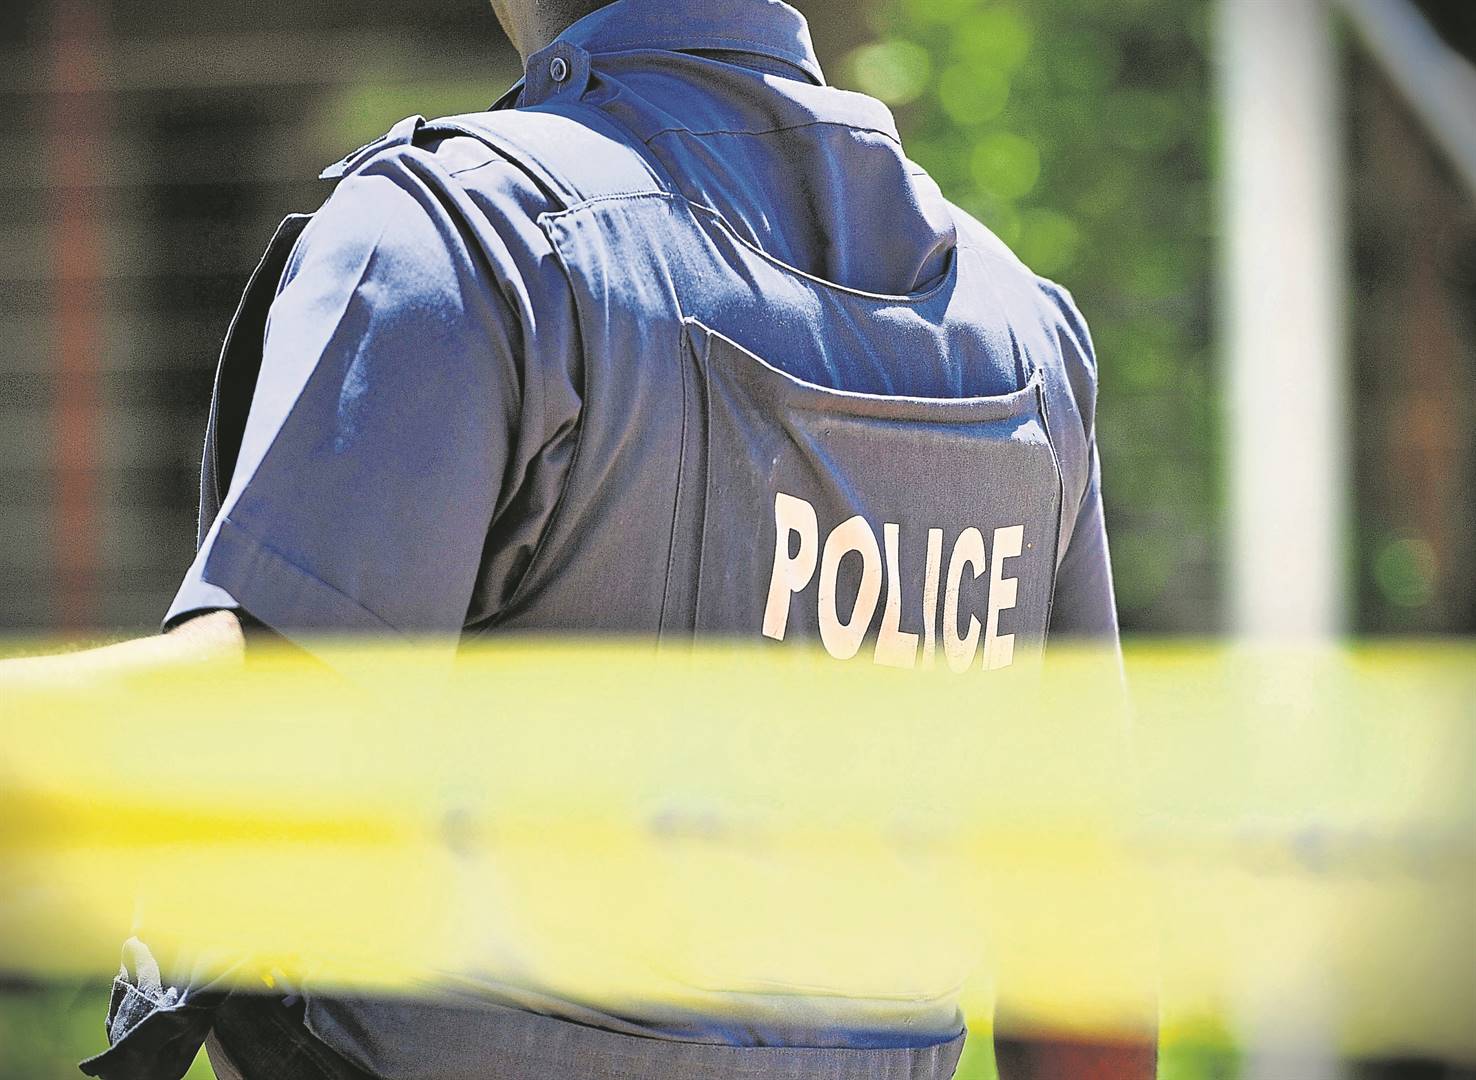 Gauteng police launched a manhunt for 15 cash-in-transit robbers who made off with an undisclosed amount of cash in Krugersdorp.